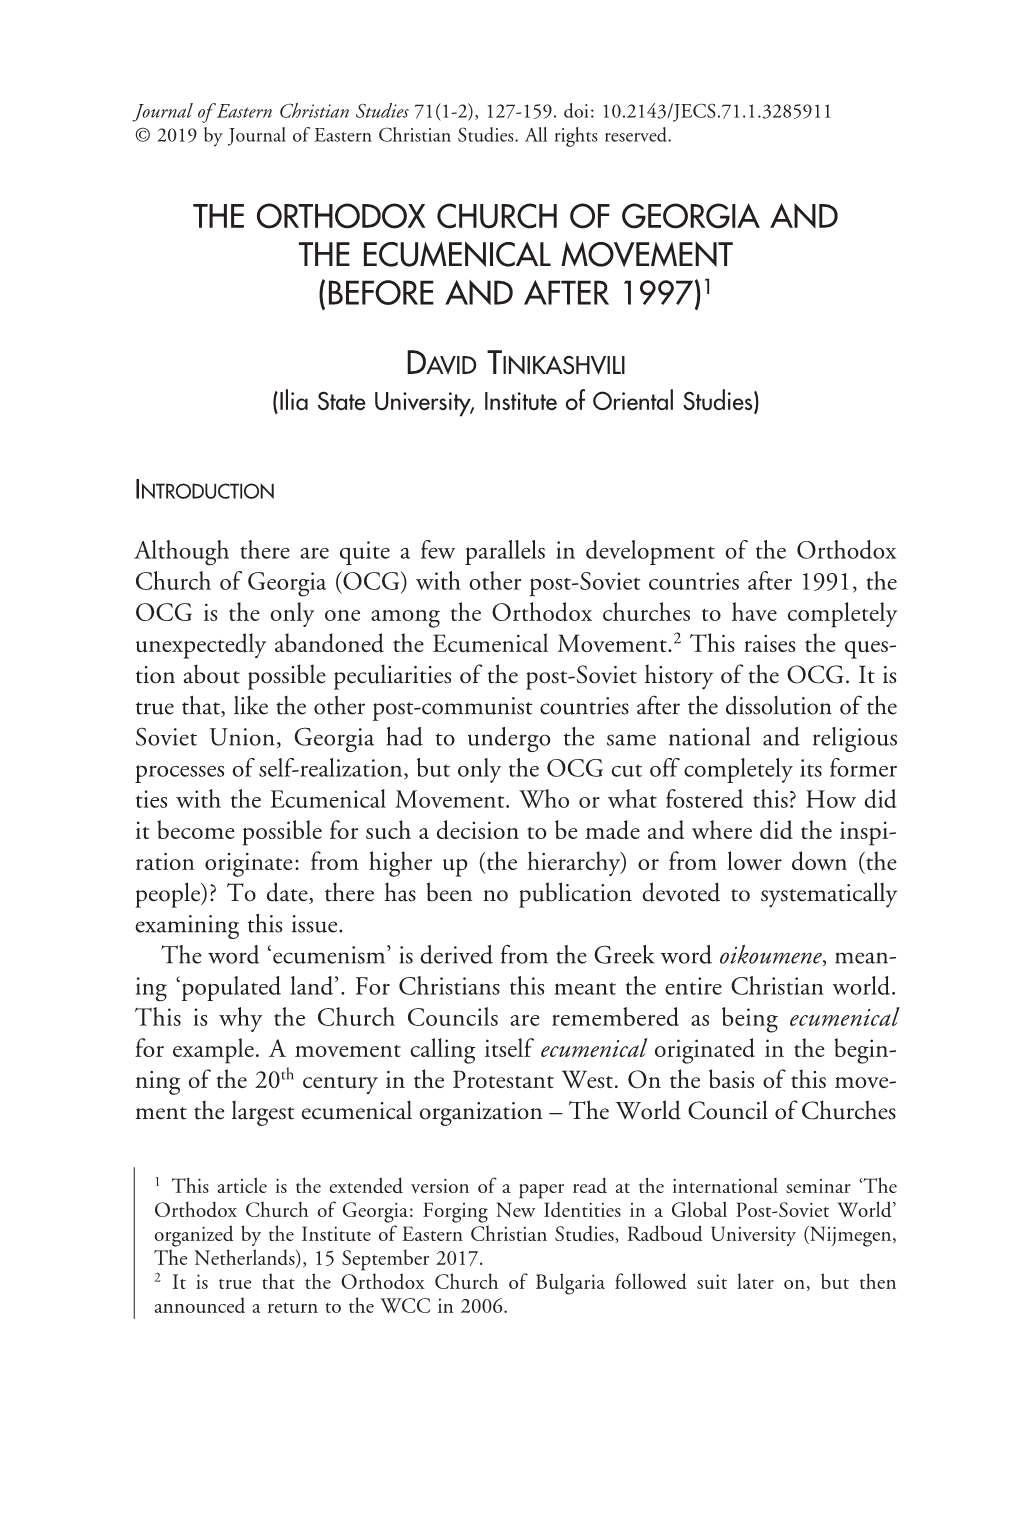 The Orthodox Church of Georgia and the Ecumenical Movement (Before and After 1997)1